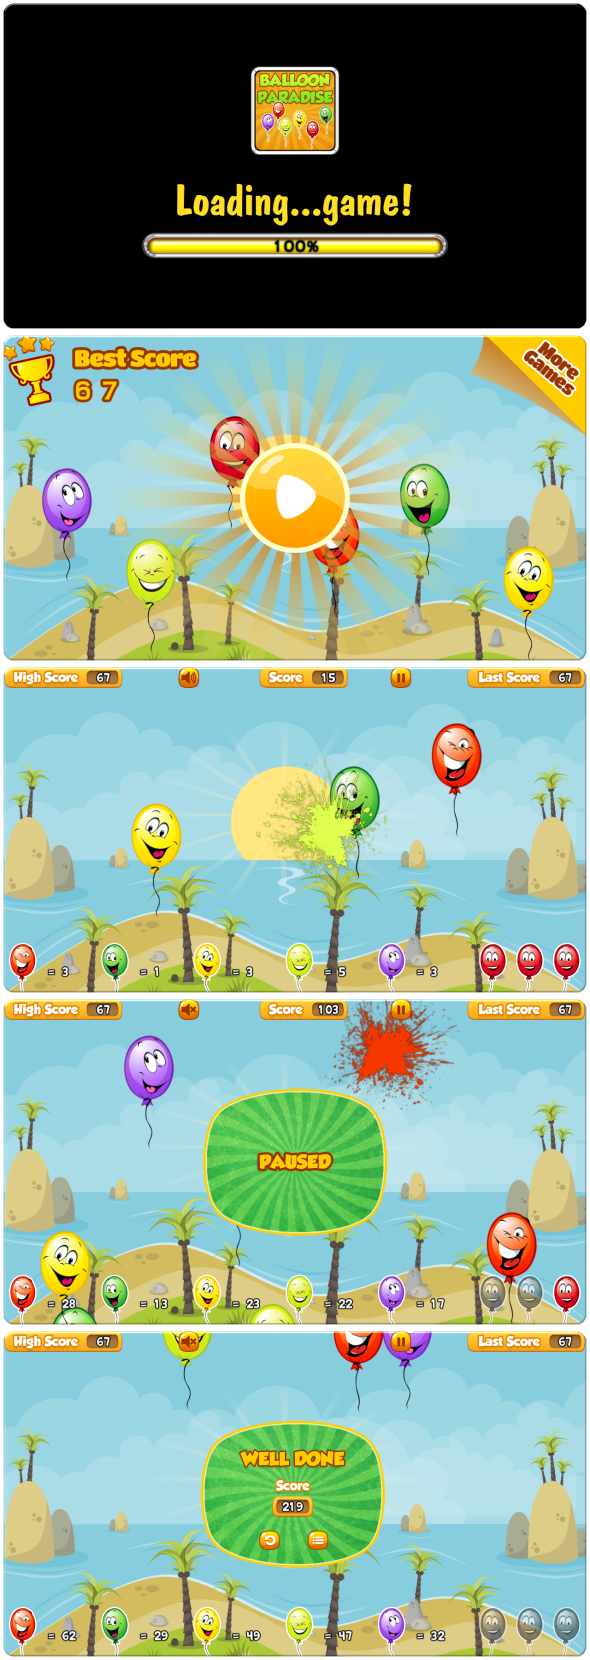 Balloon Paradise - HTML5 Mobile Game (Construct 3 | Construct 2 | Capx) - 1